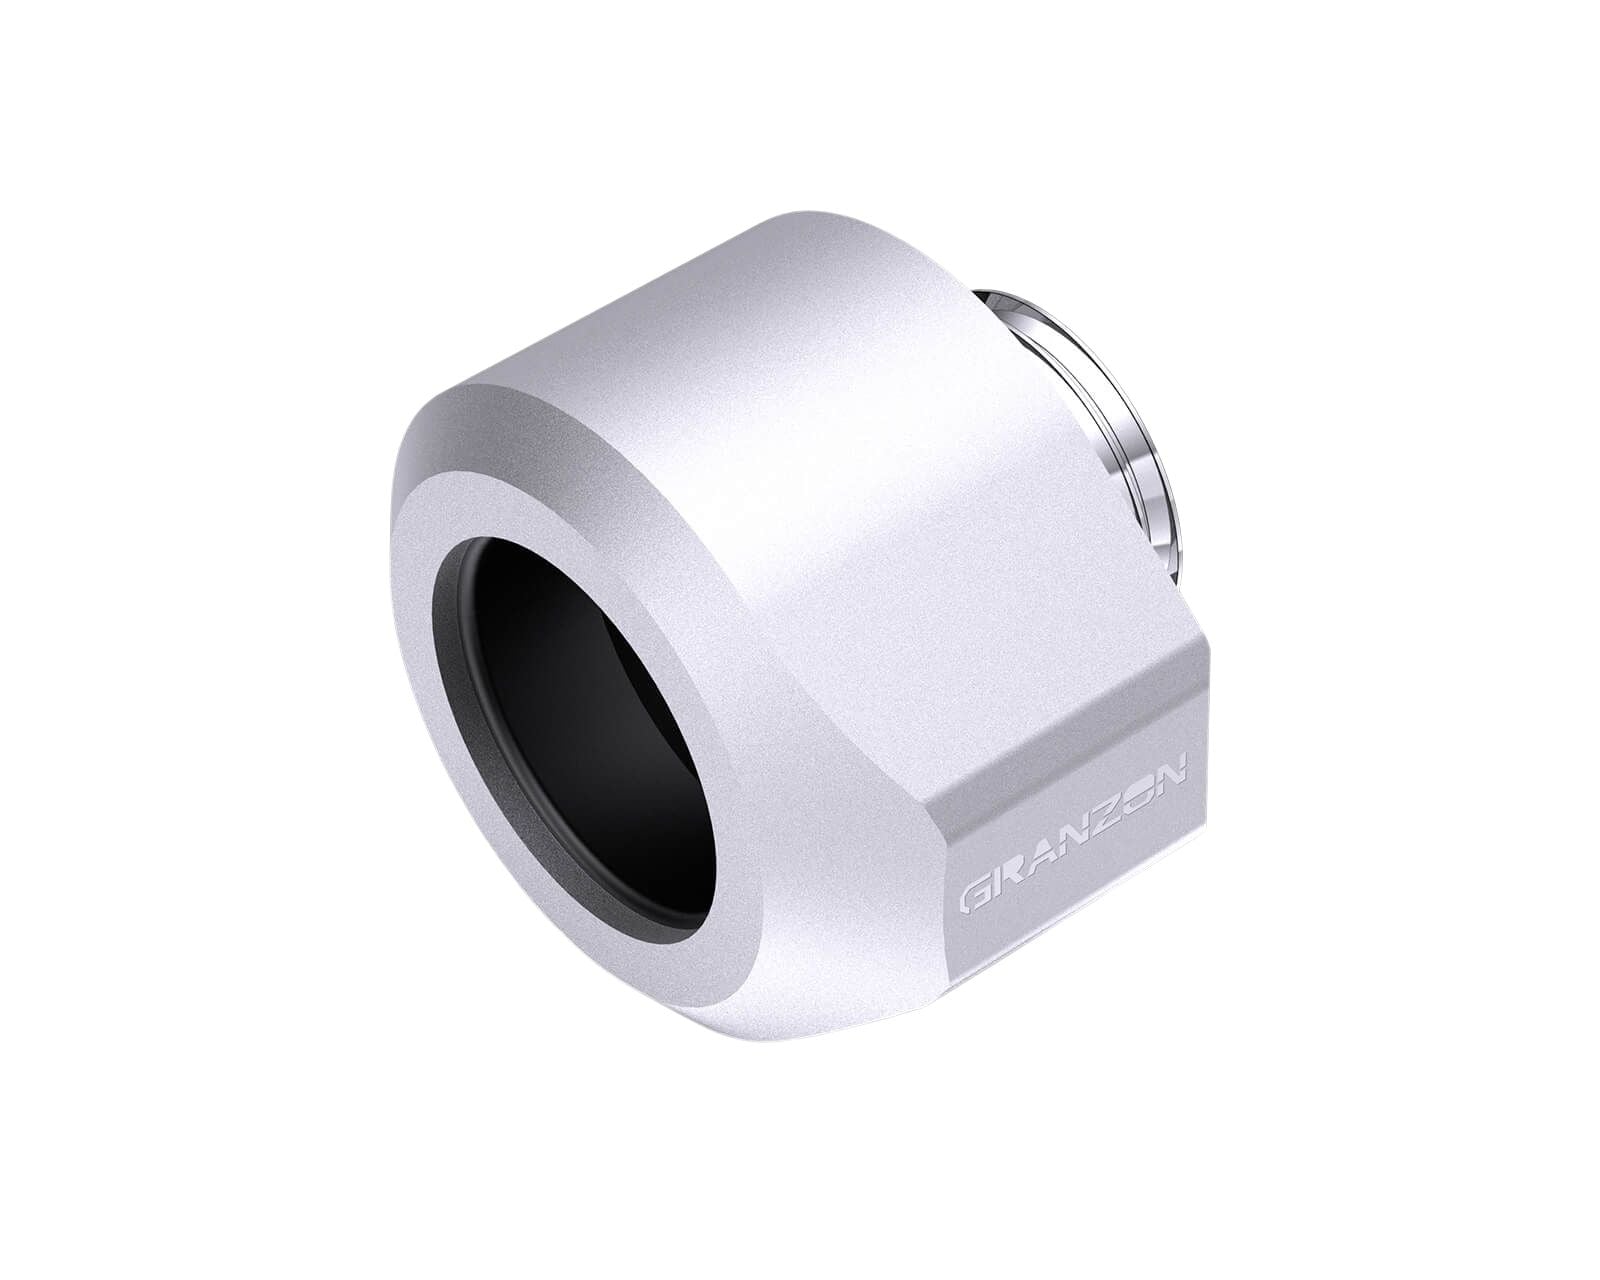 Granzon G 1/4in. Rigid 14mm OD Fitting (GD-FT14) - PrimoChill - KEEPING IT COOL White